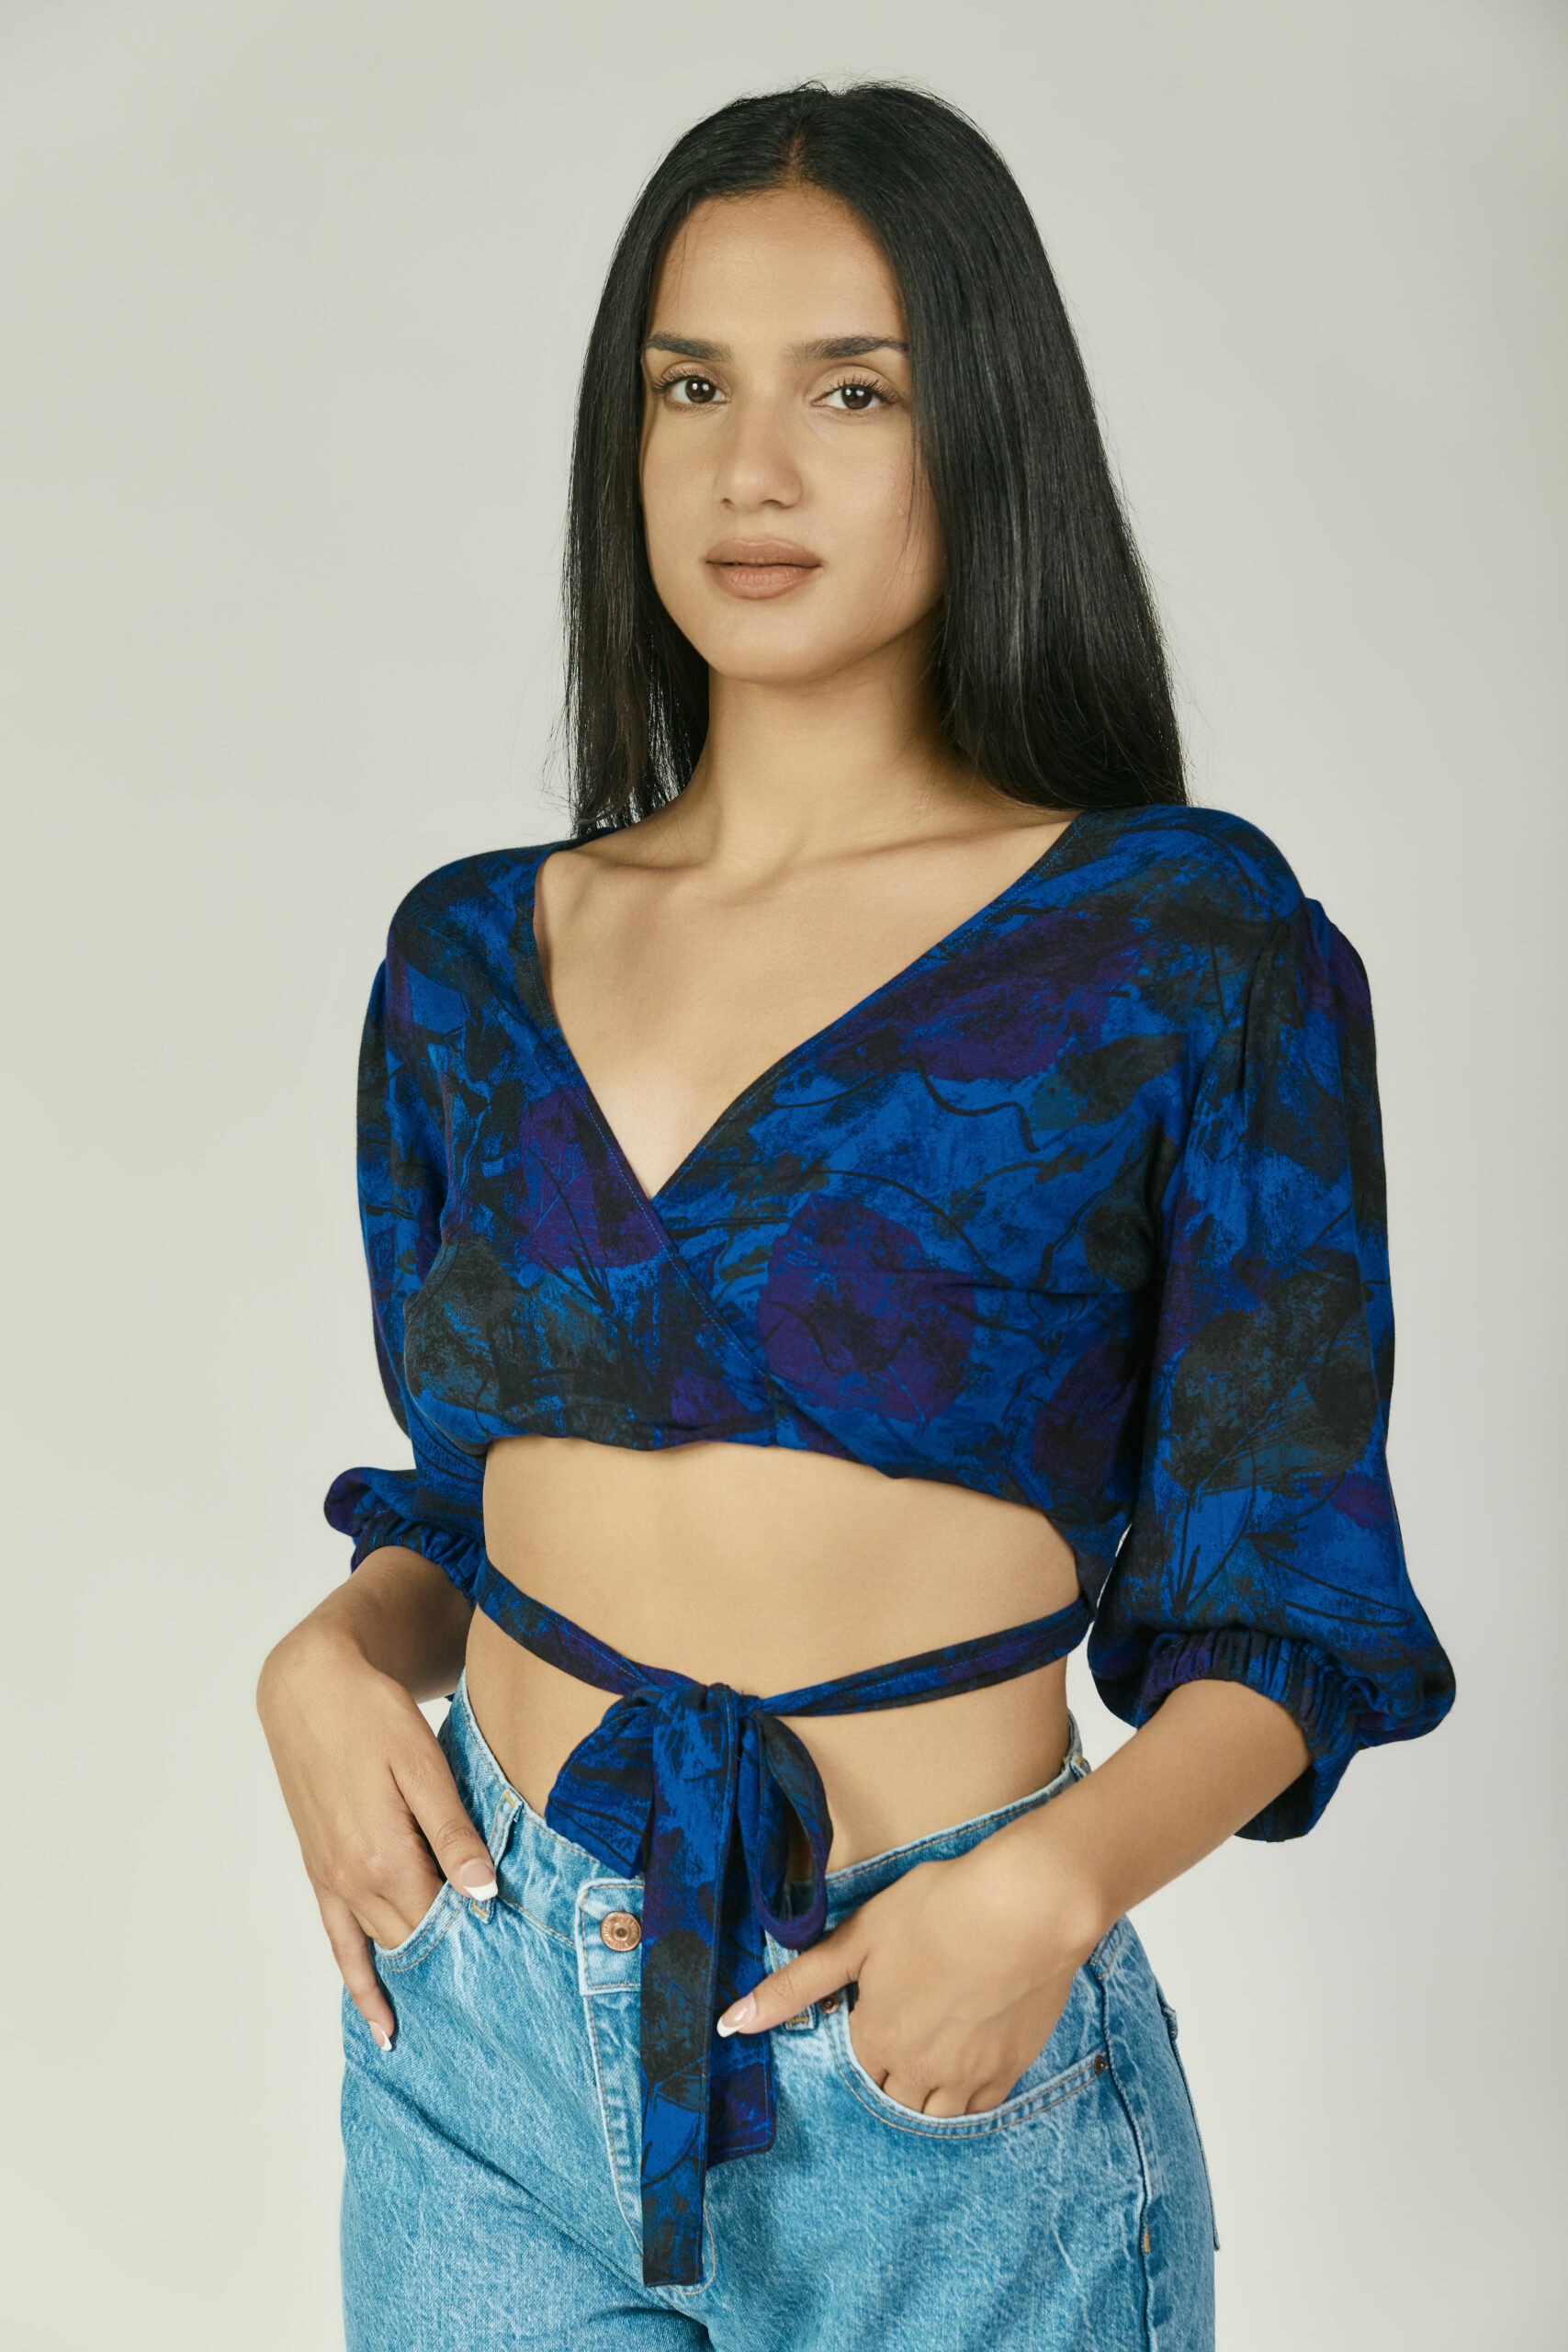 Floral Top in blue and black.